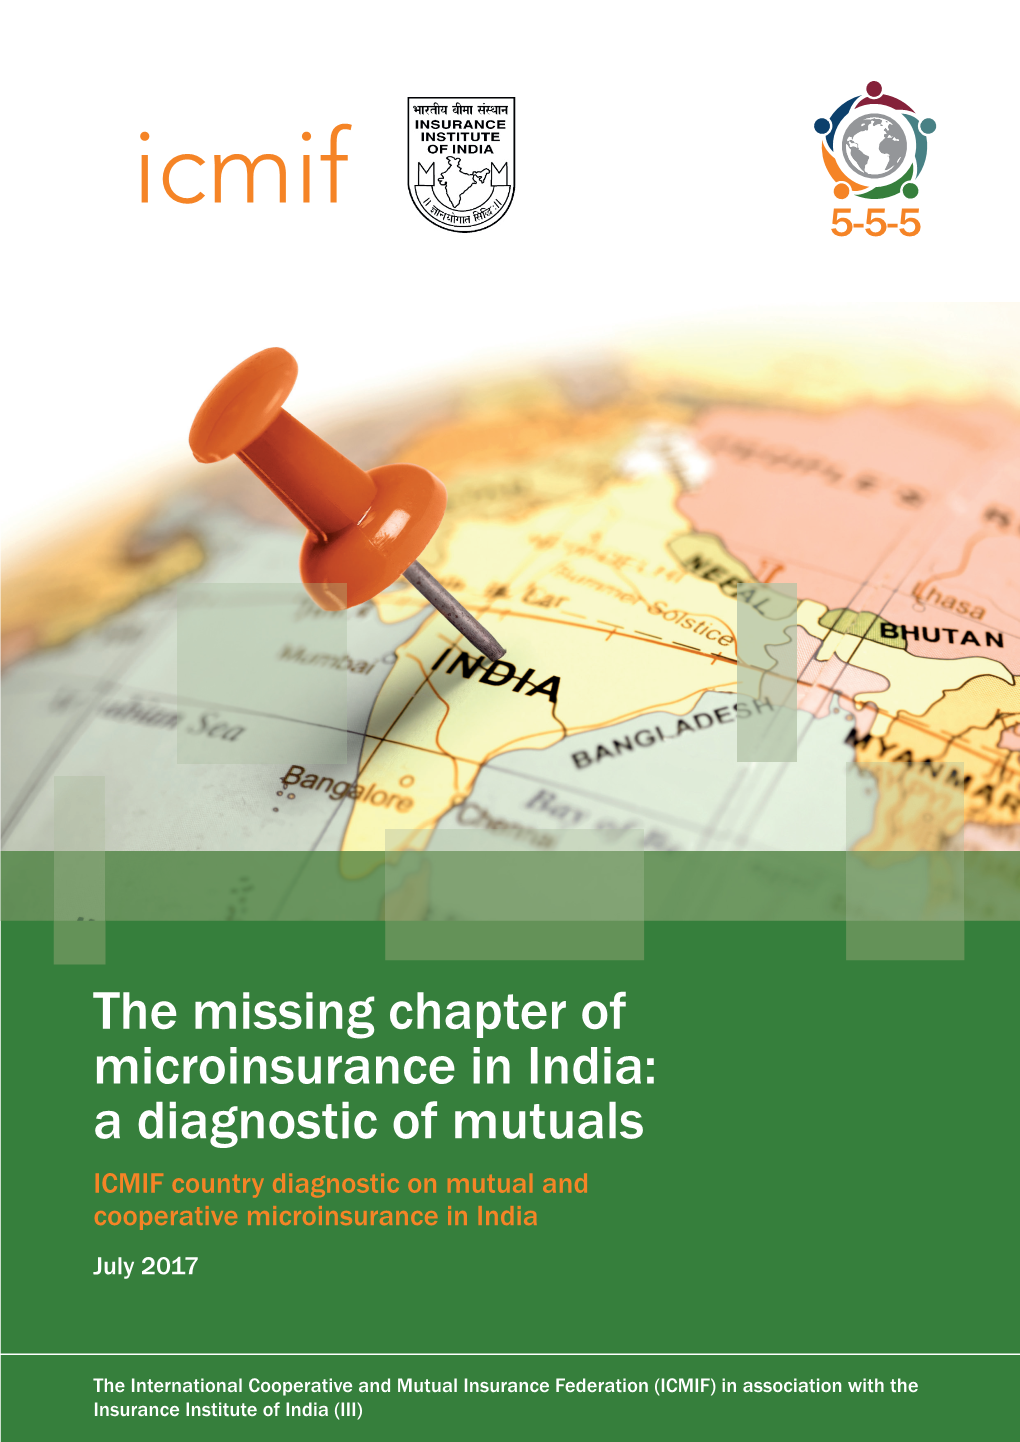 The Missing Chapter of Microinsurance in India: a Diagnostic of Mutuals ICMIF Country Diagnostic on Mutual and Cooperative Microinsurance in India July 2017